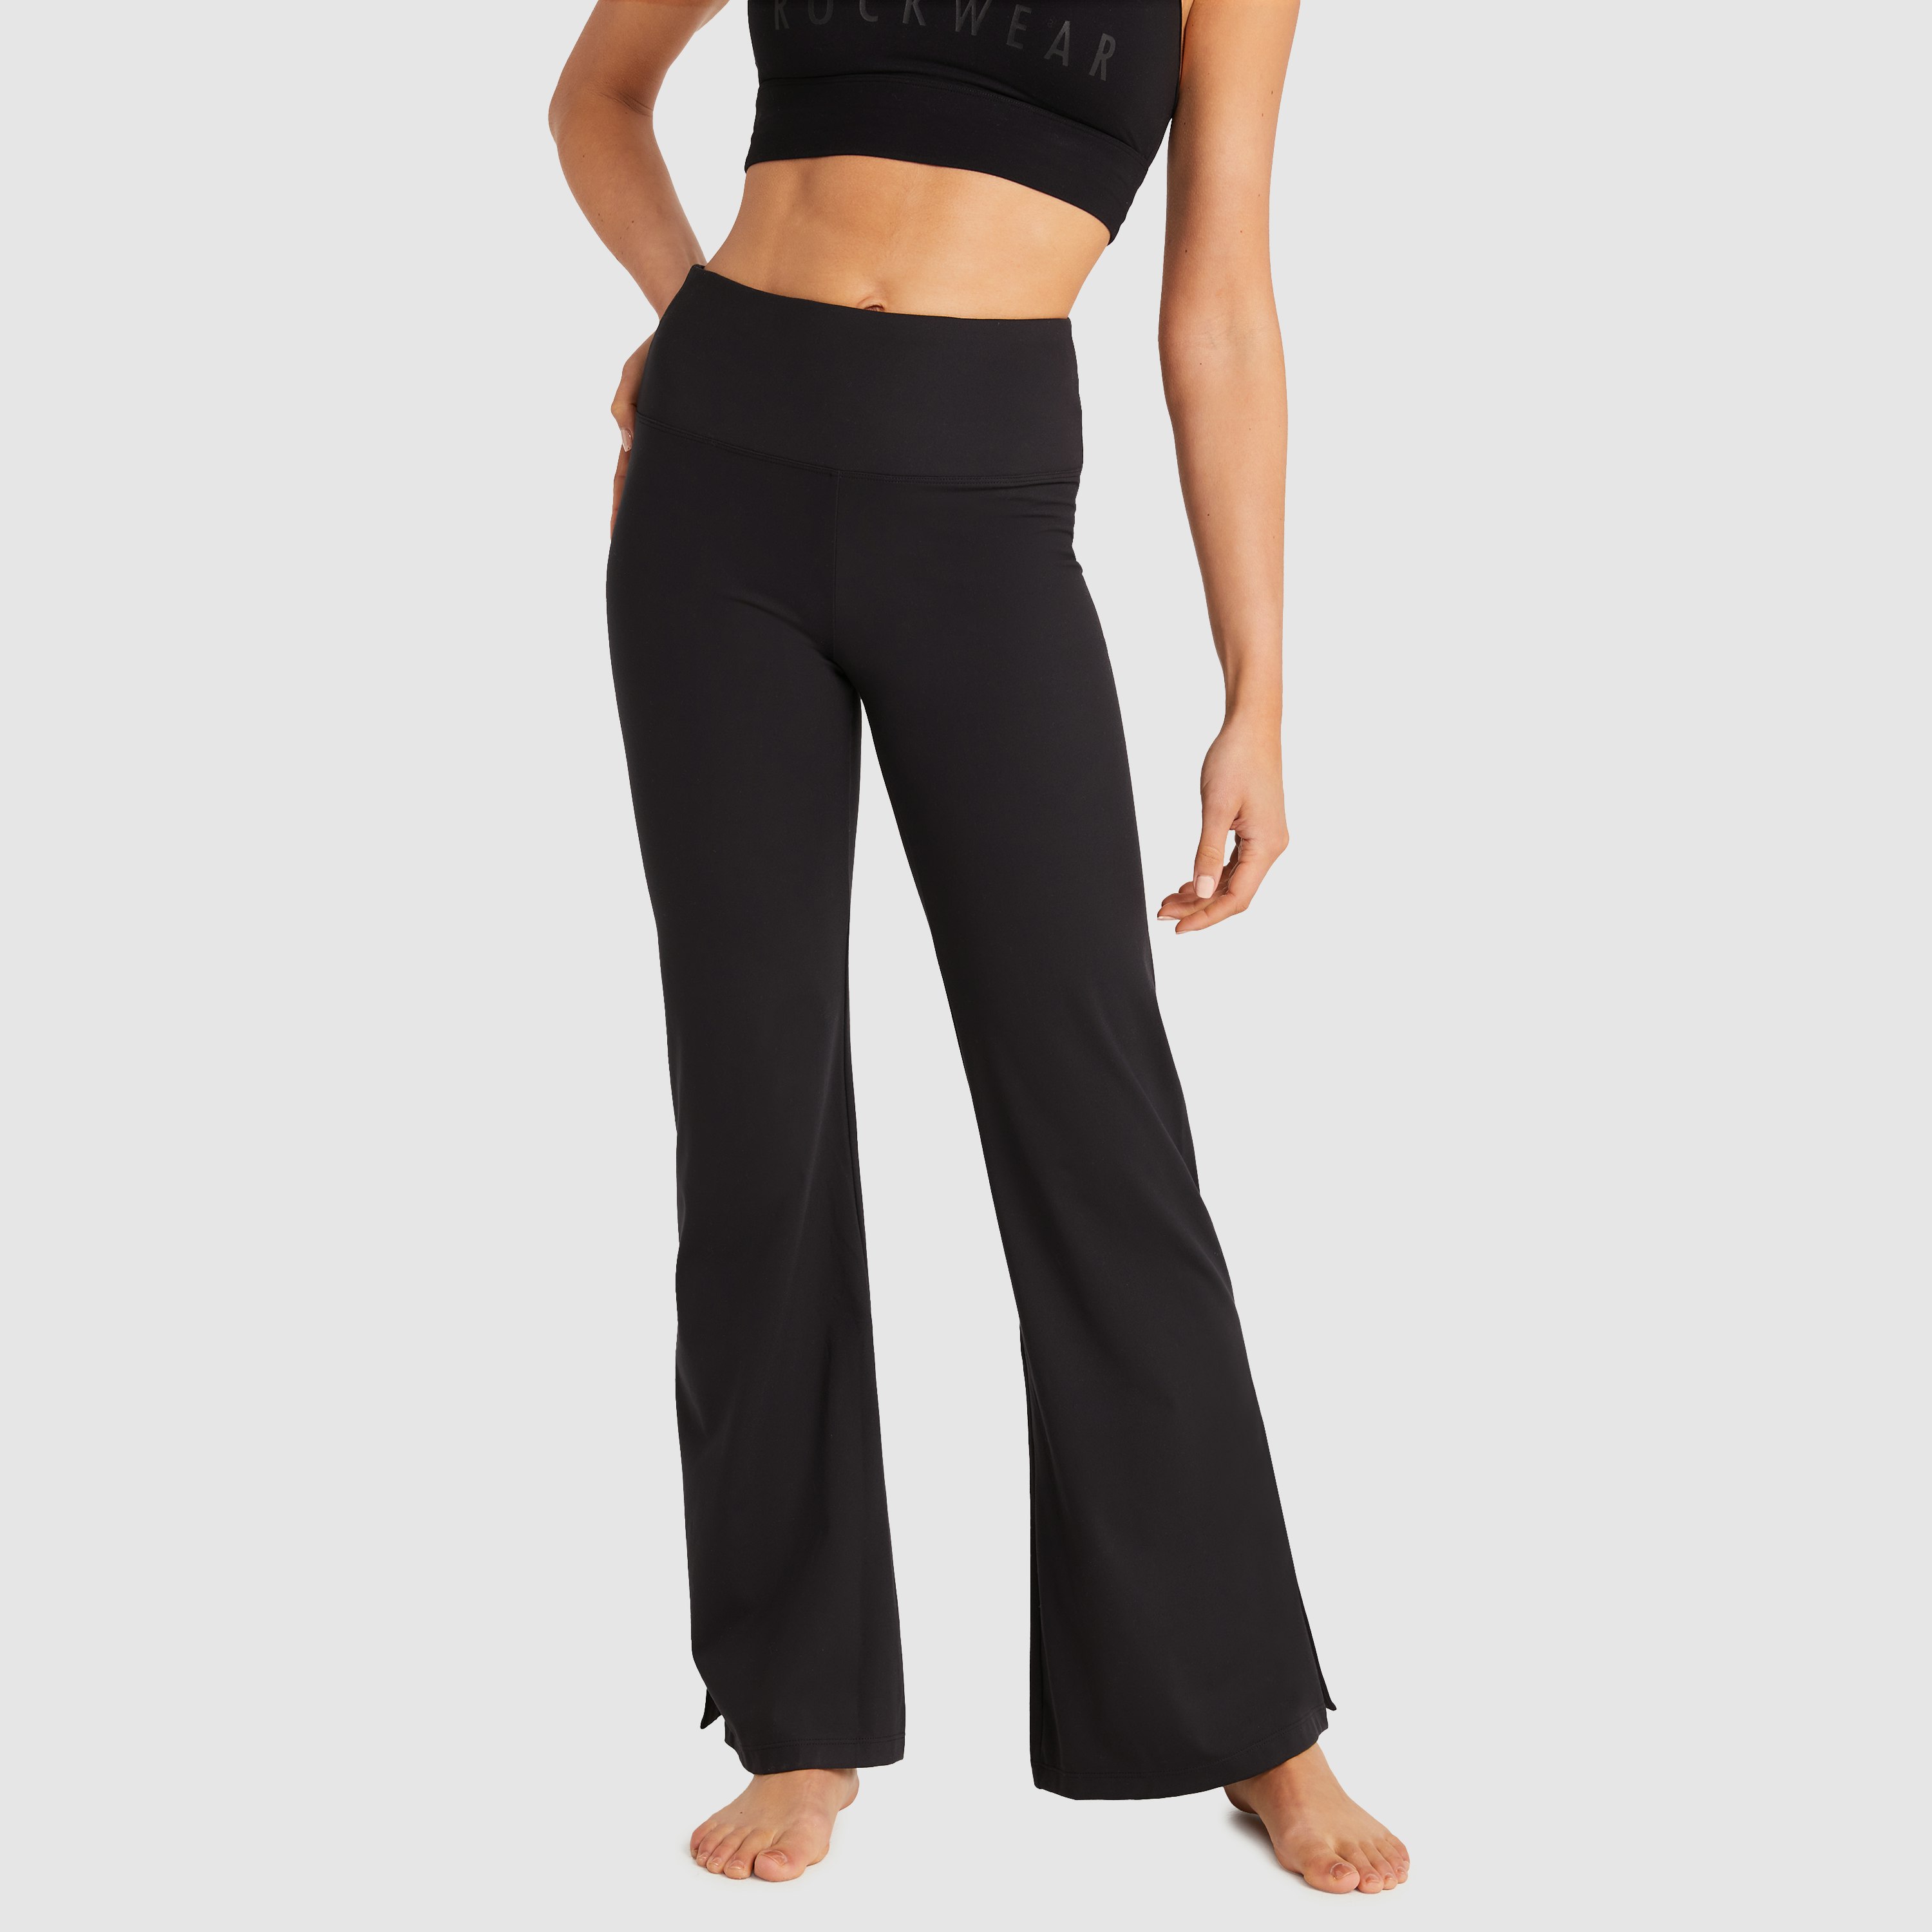 Black gym flare pants for women, ankle length sports pants.